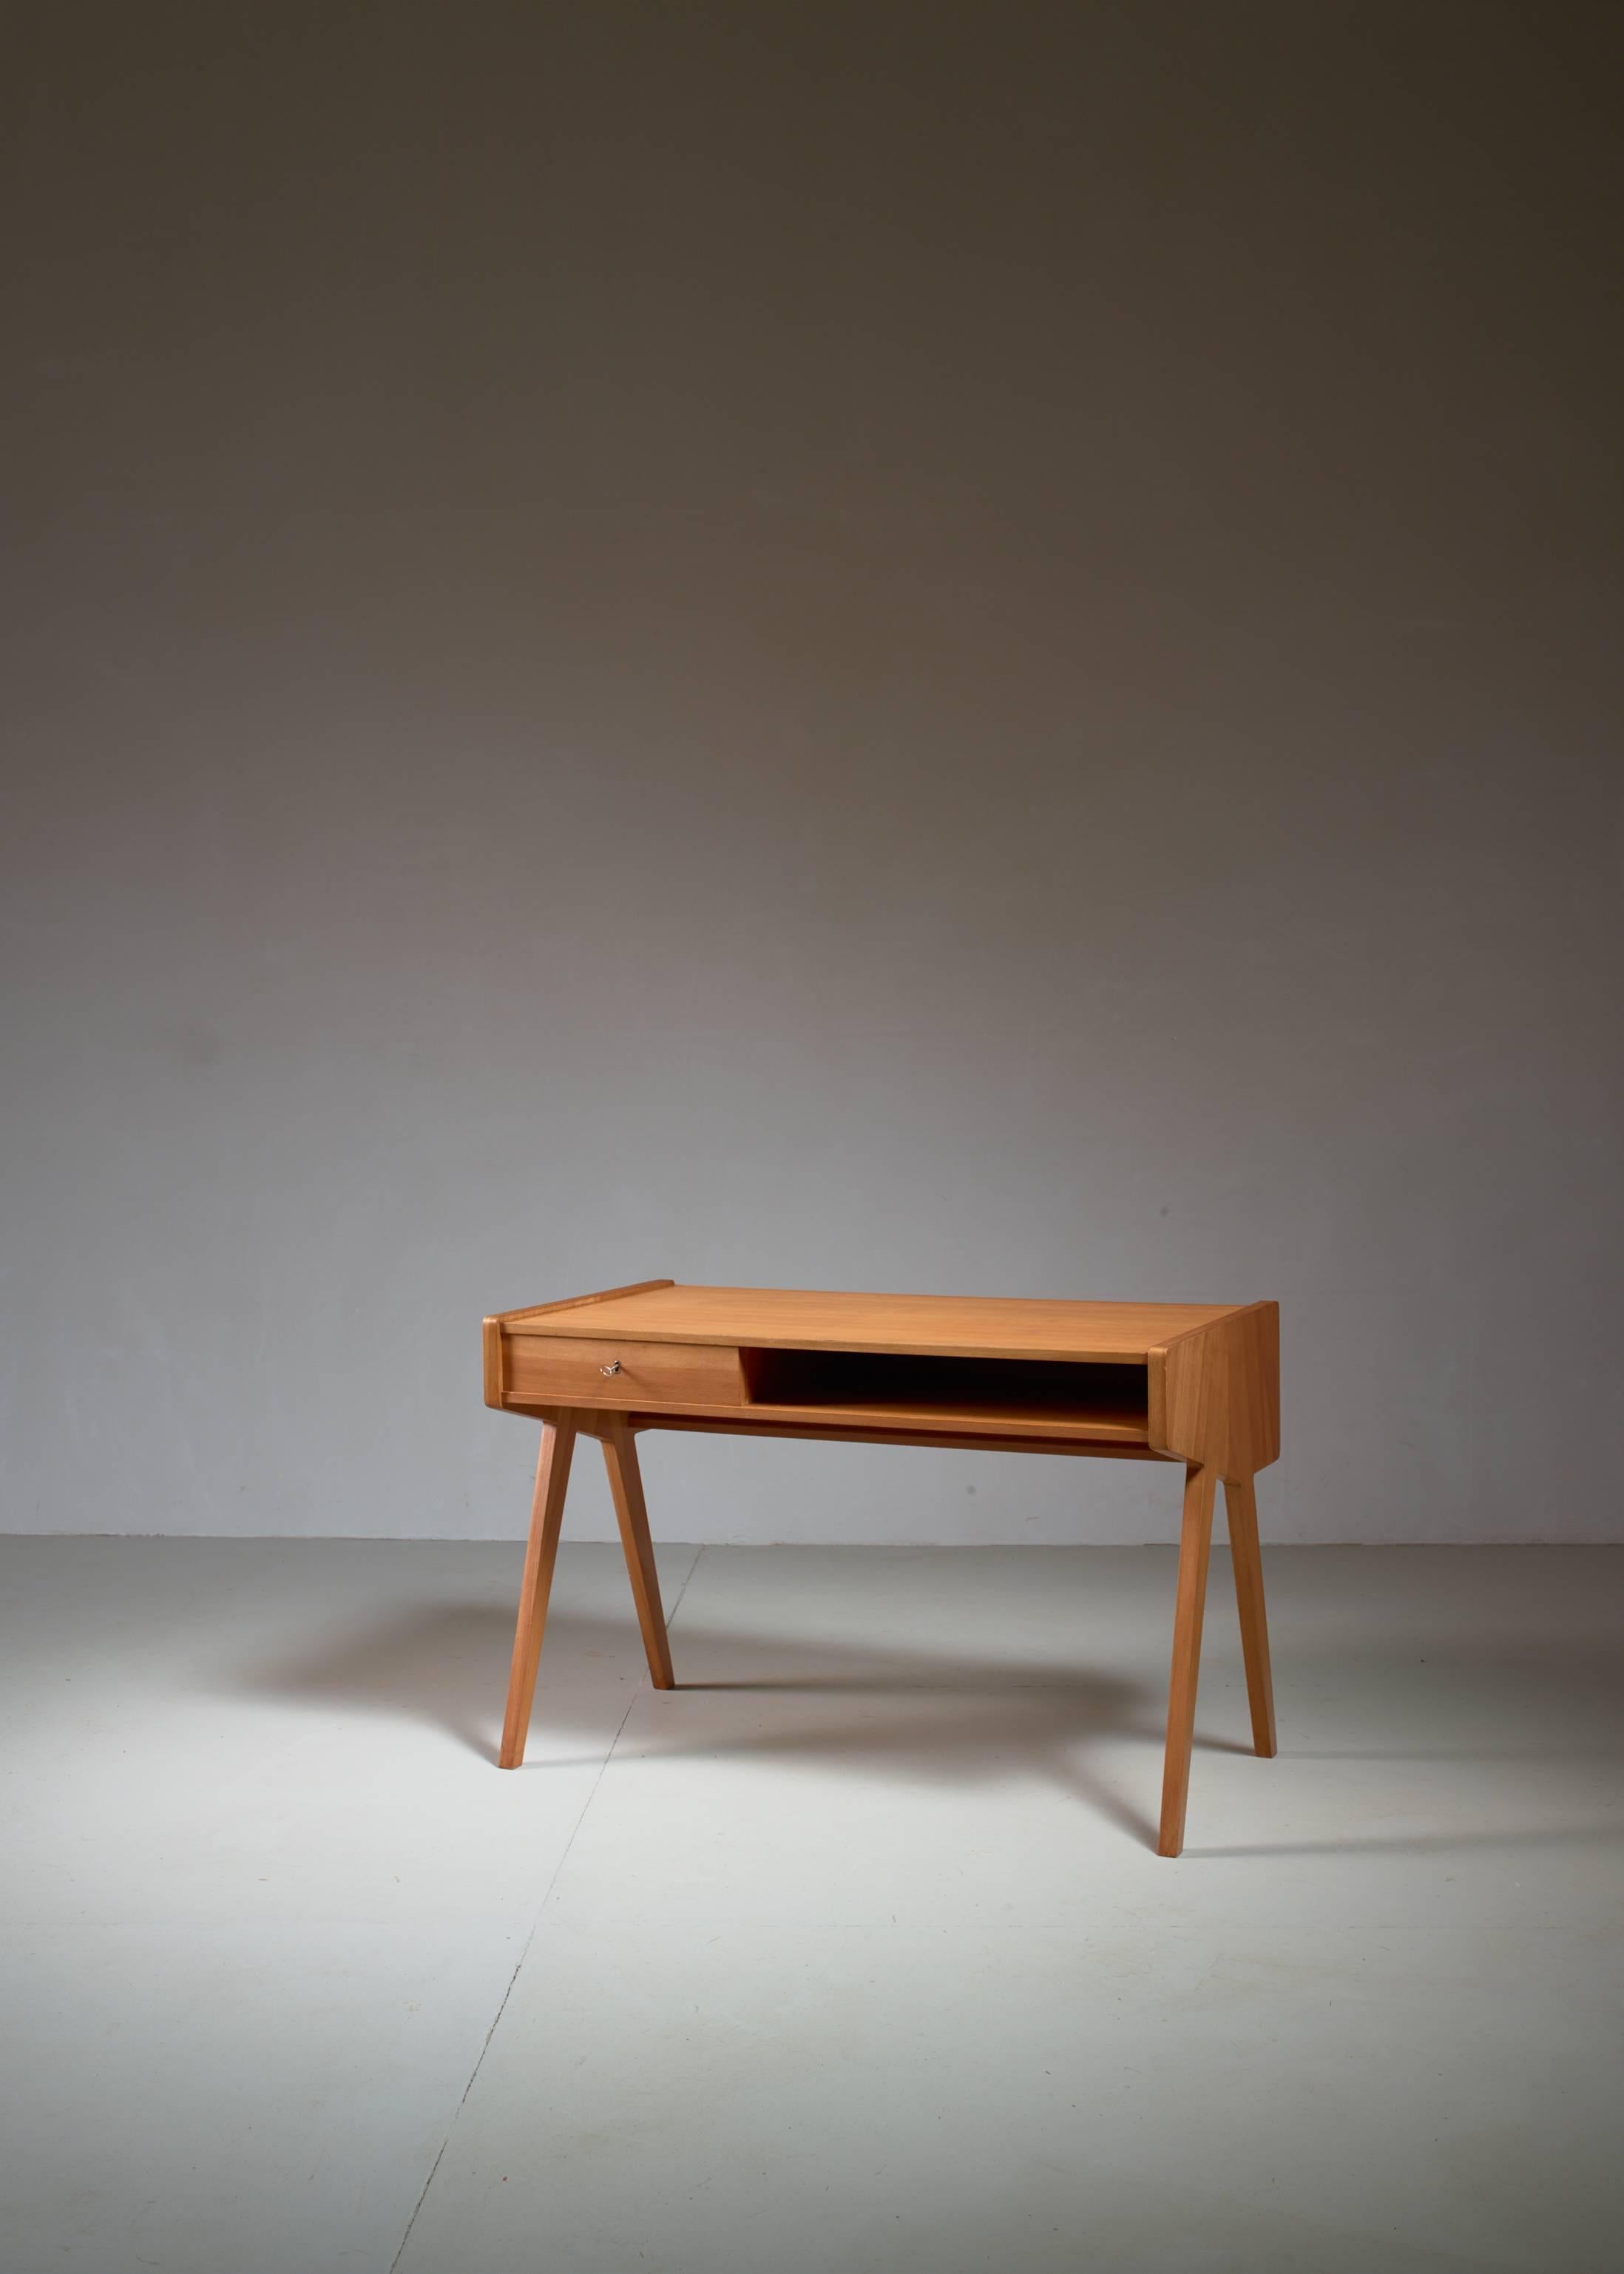 A small wooden writing or ladies desk on V-shaped legs by German designer Helmut Magg for WK Möbel. The desk has drawer and storage space in front and a shallow storage space at the back. The leg height is 61 cm (24